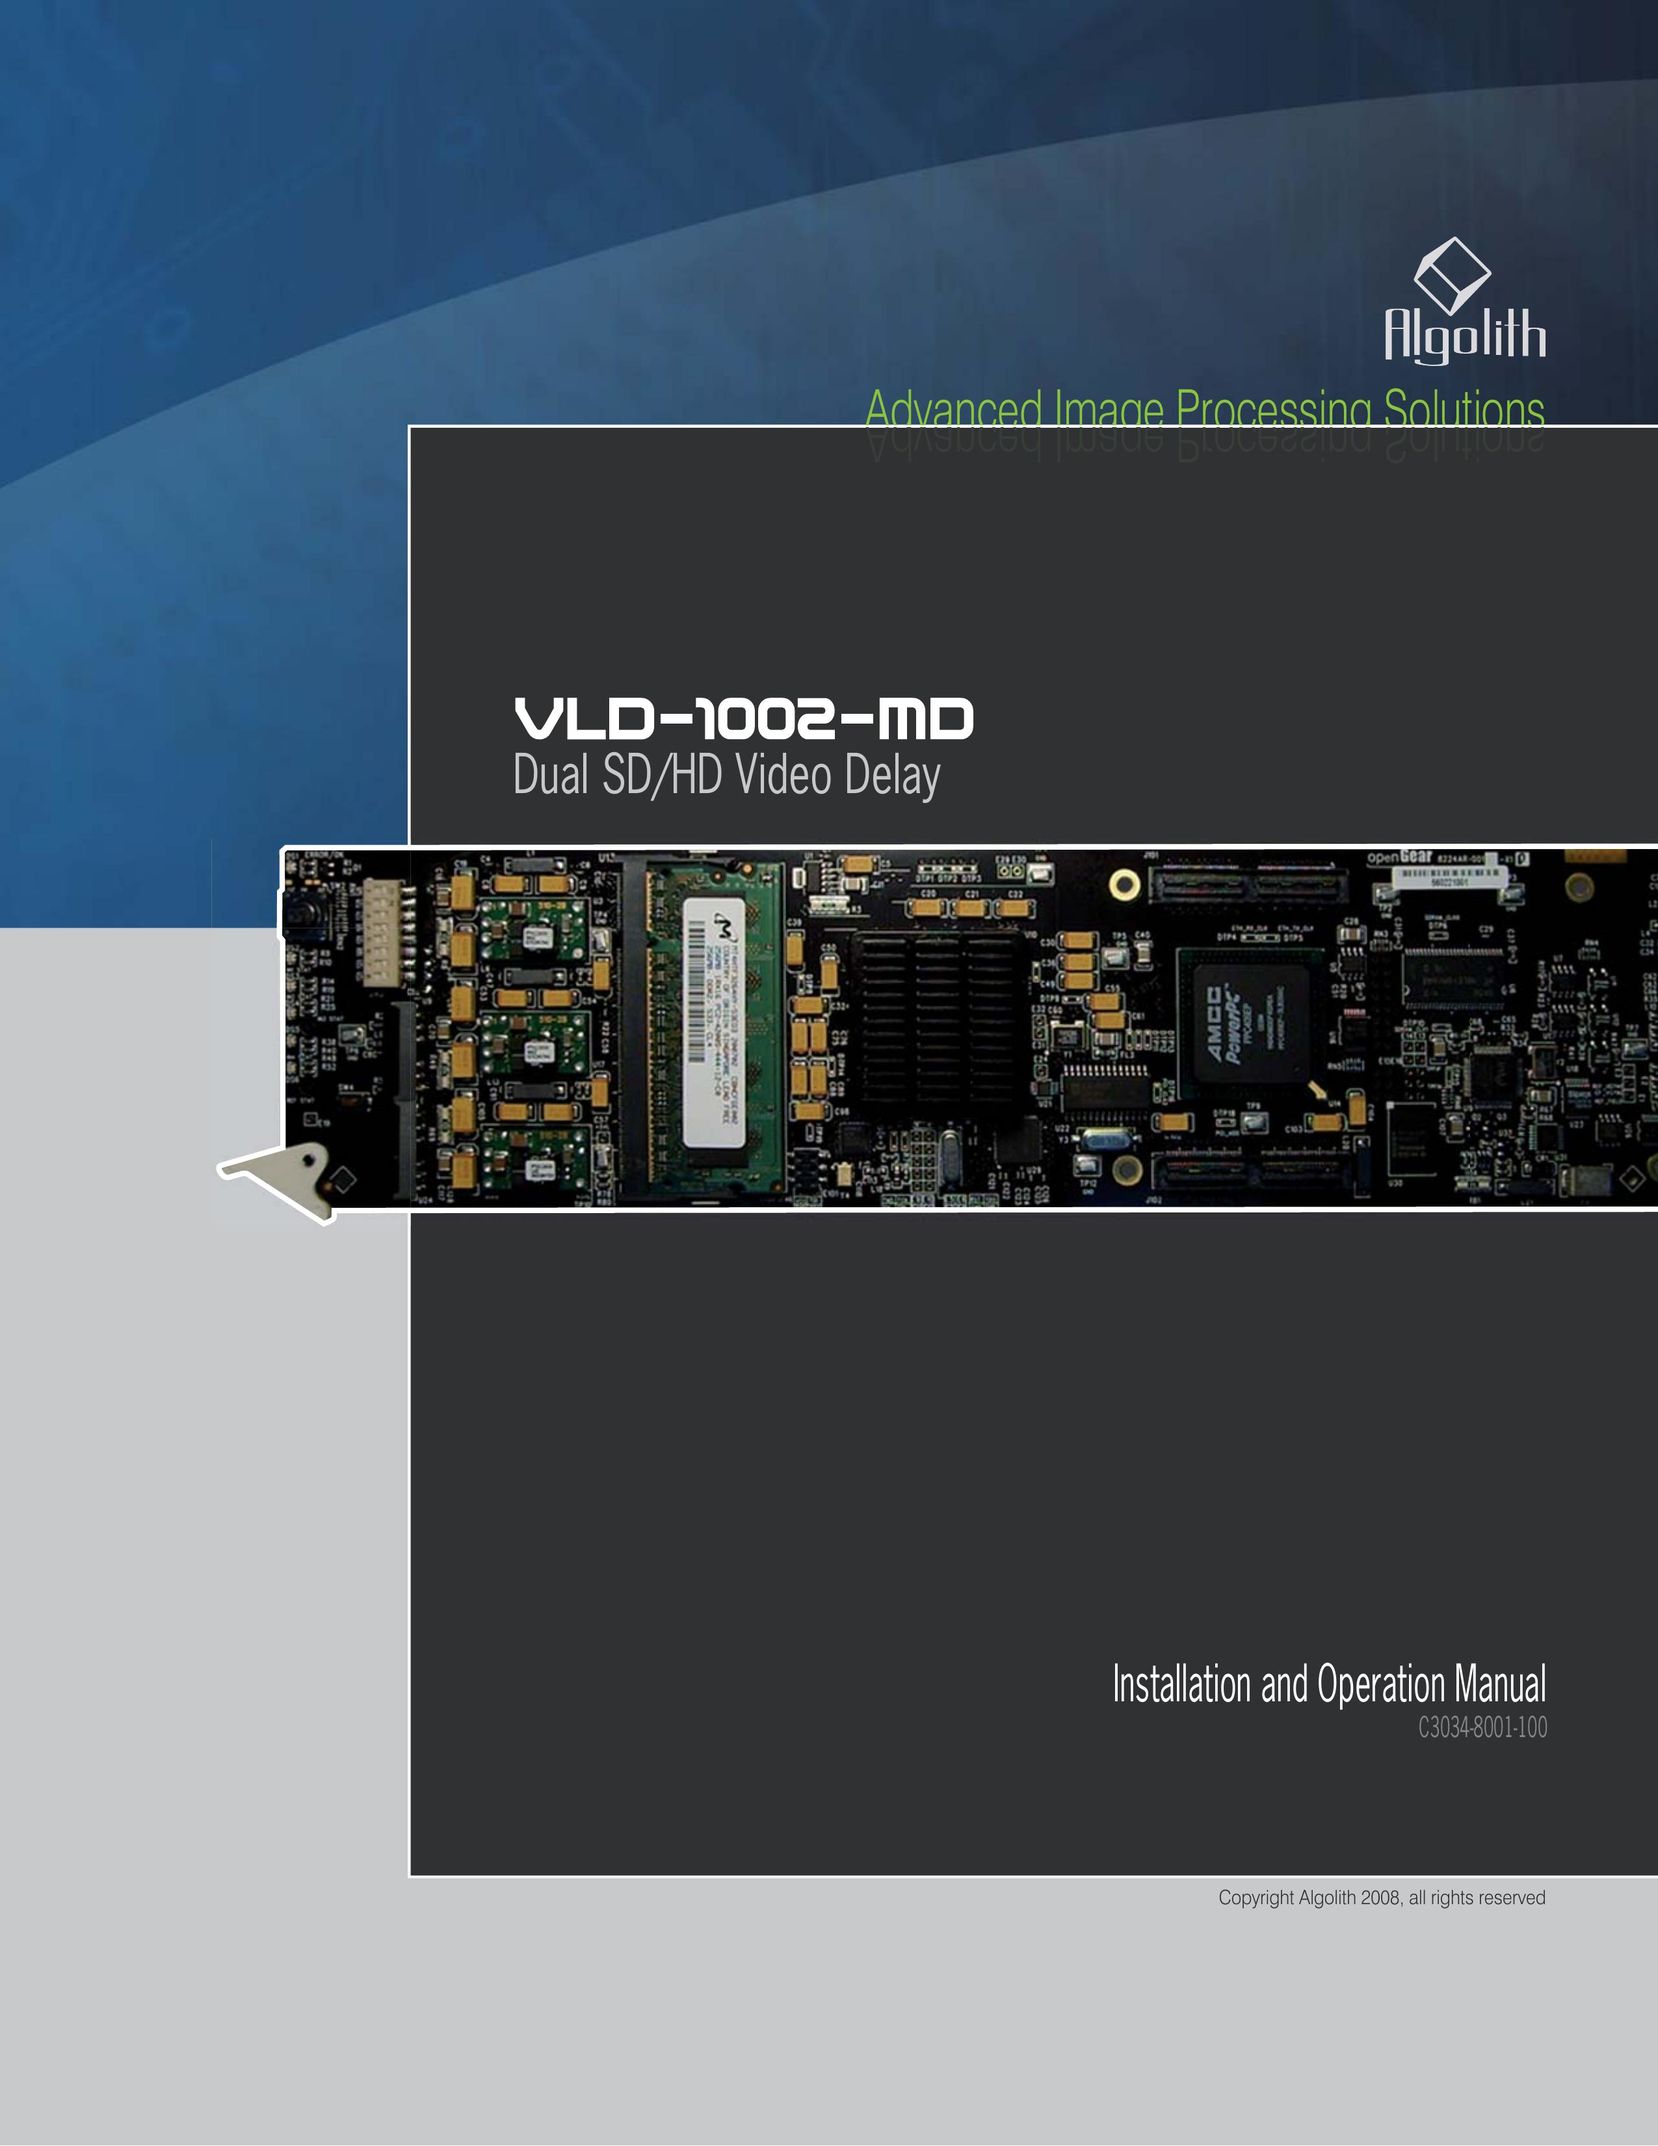 Algolith VLD-1002-MD Stereo Receiver User Manual